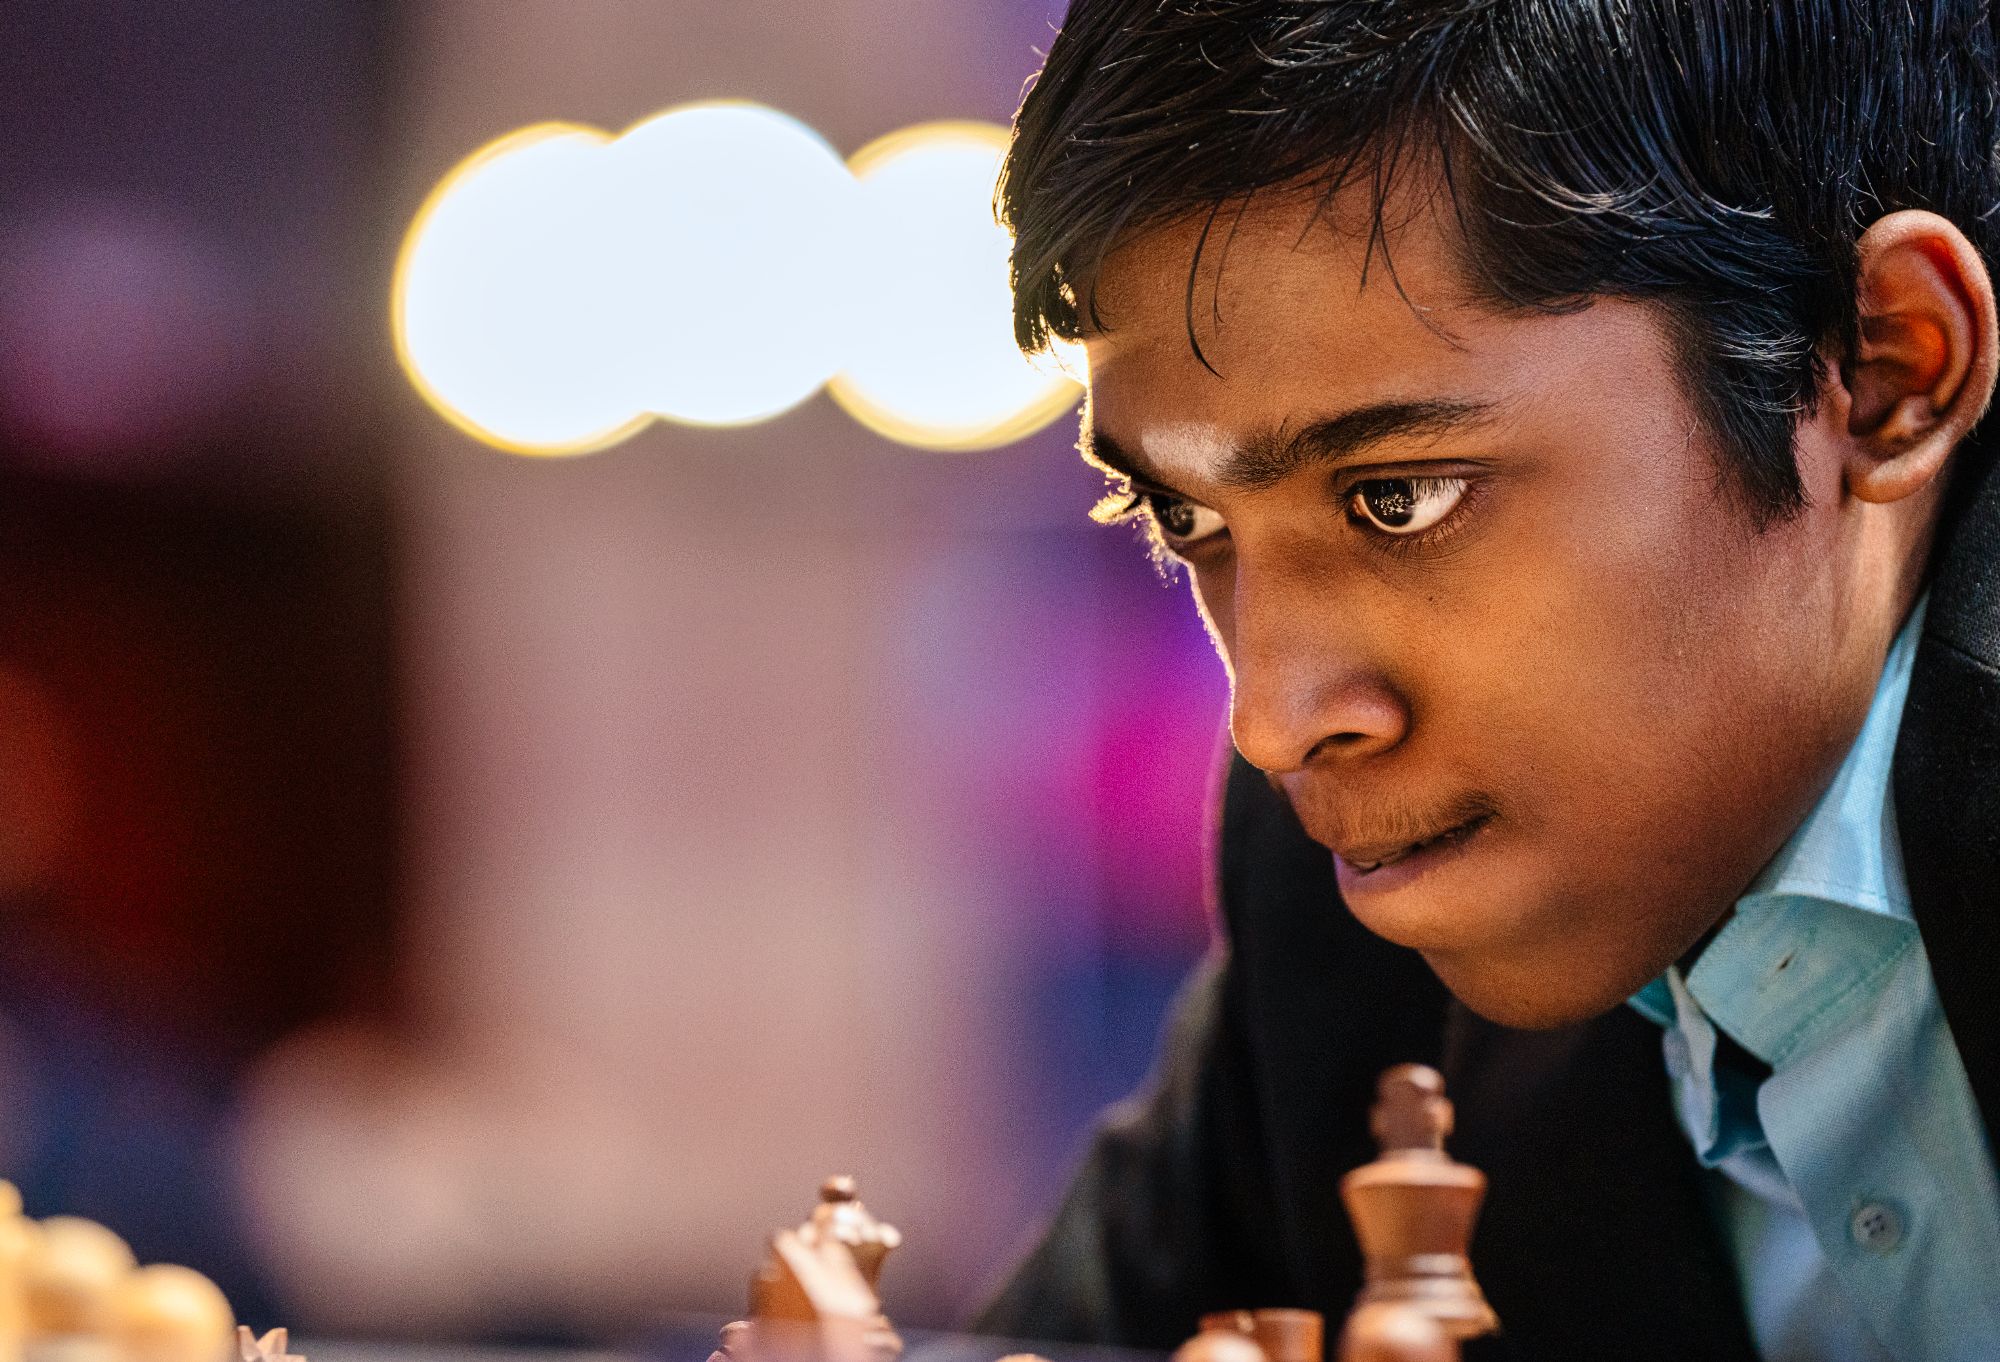 Tata Steel Chess India: Gukesh among leaders after three rounds